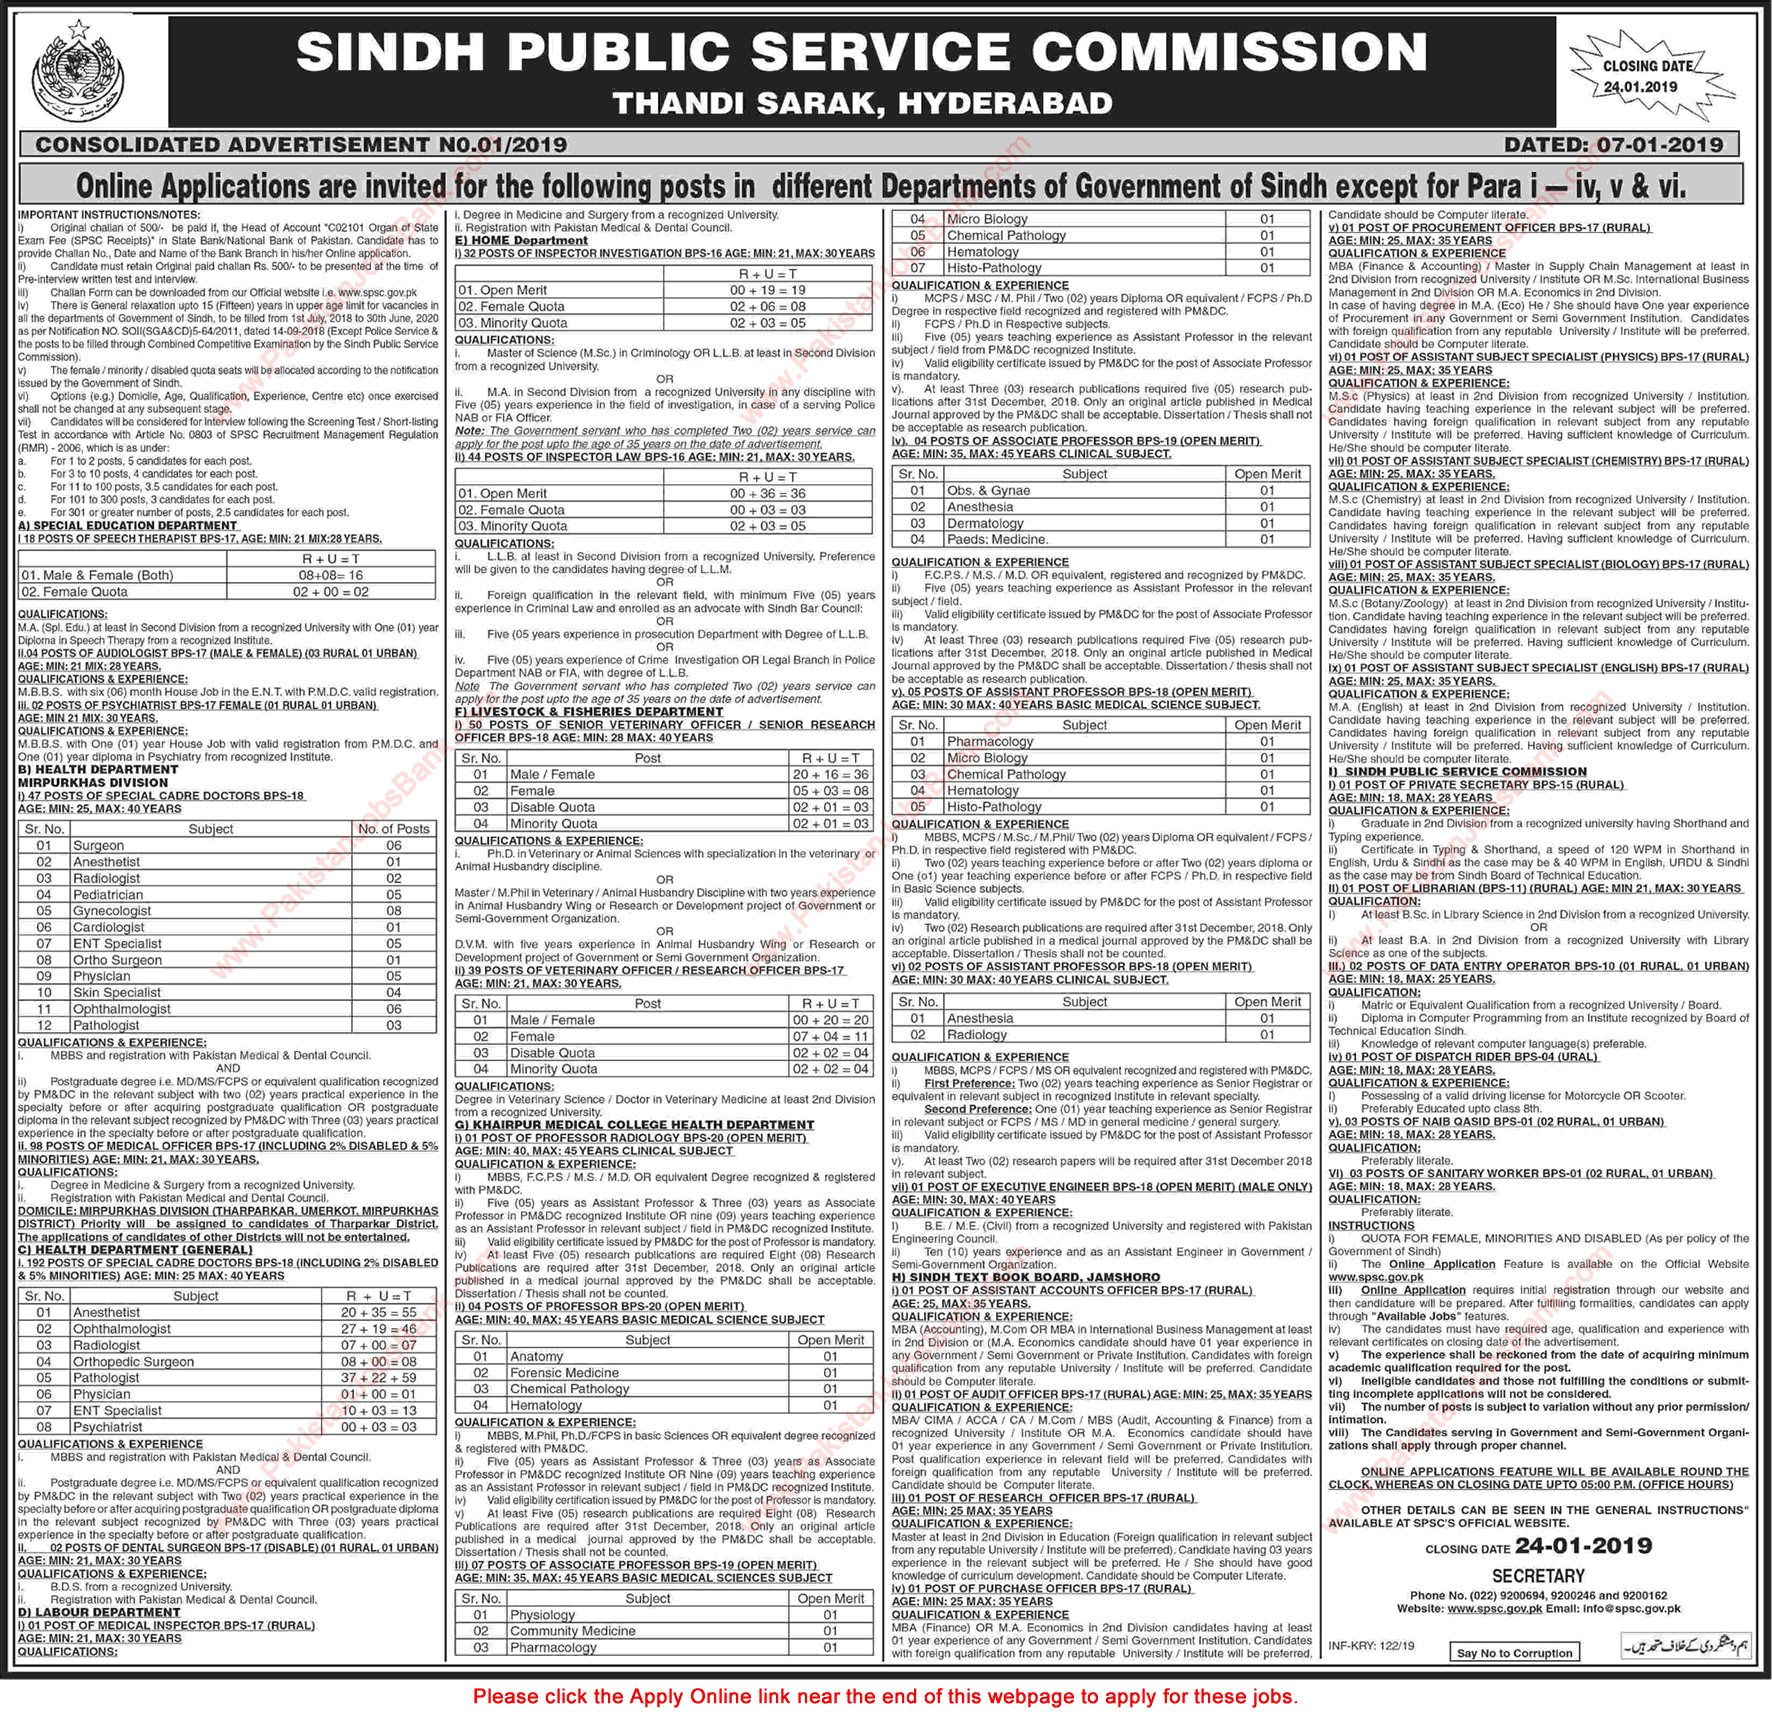 SPSC Jobs 2019 Apply Online Consolidated Advertisement No 01/2019 1/2019 Latest